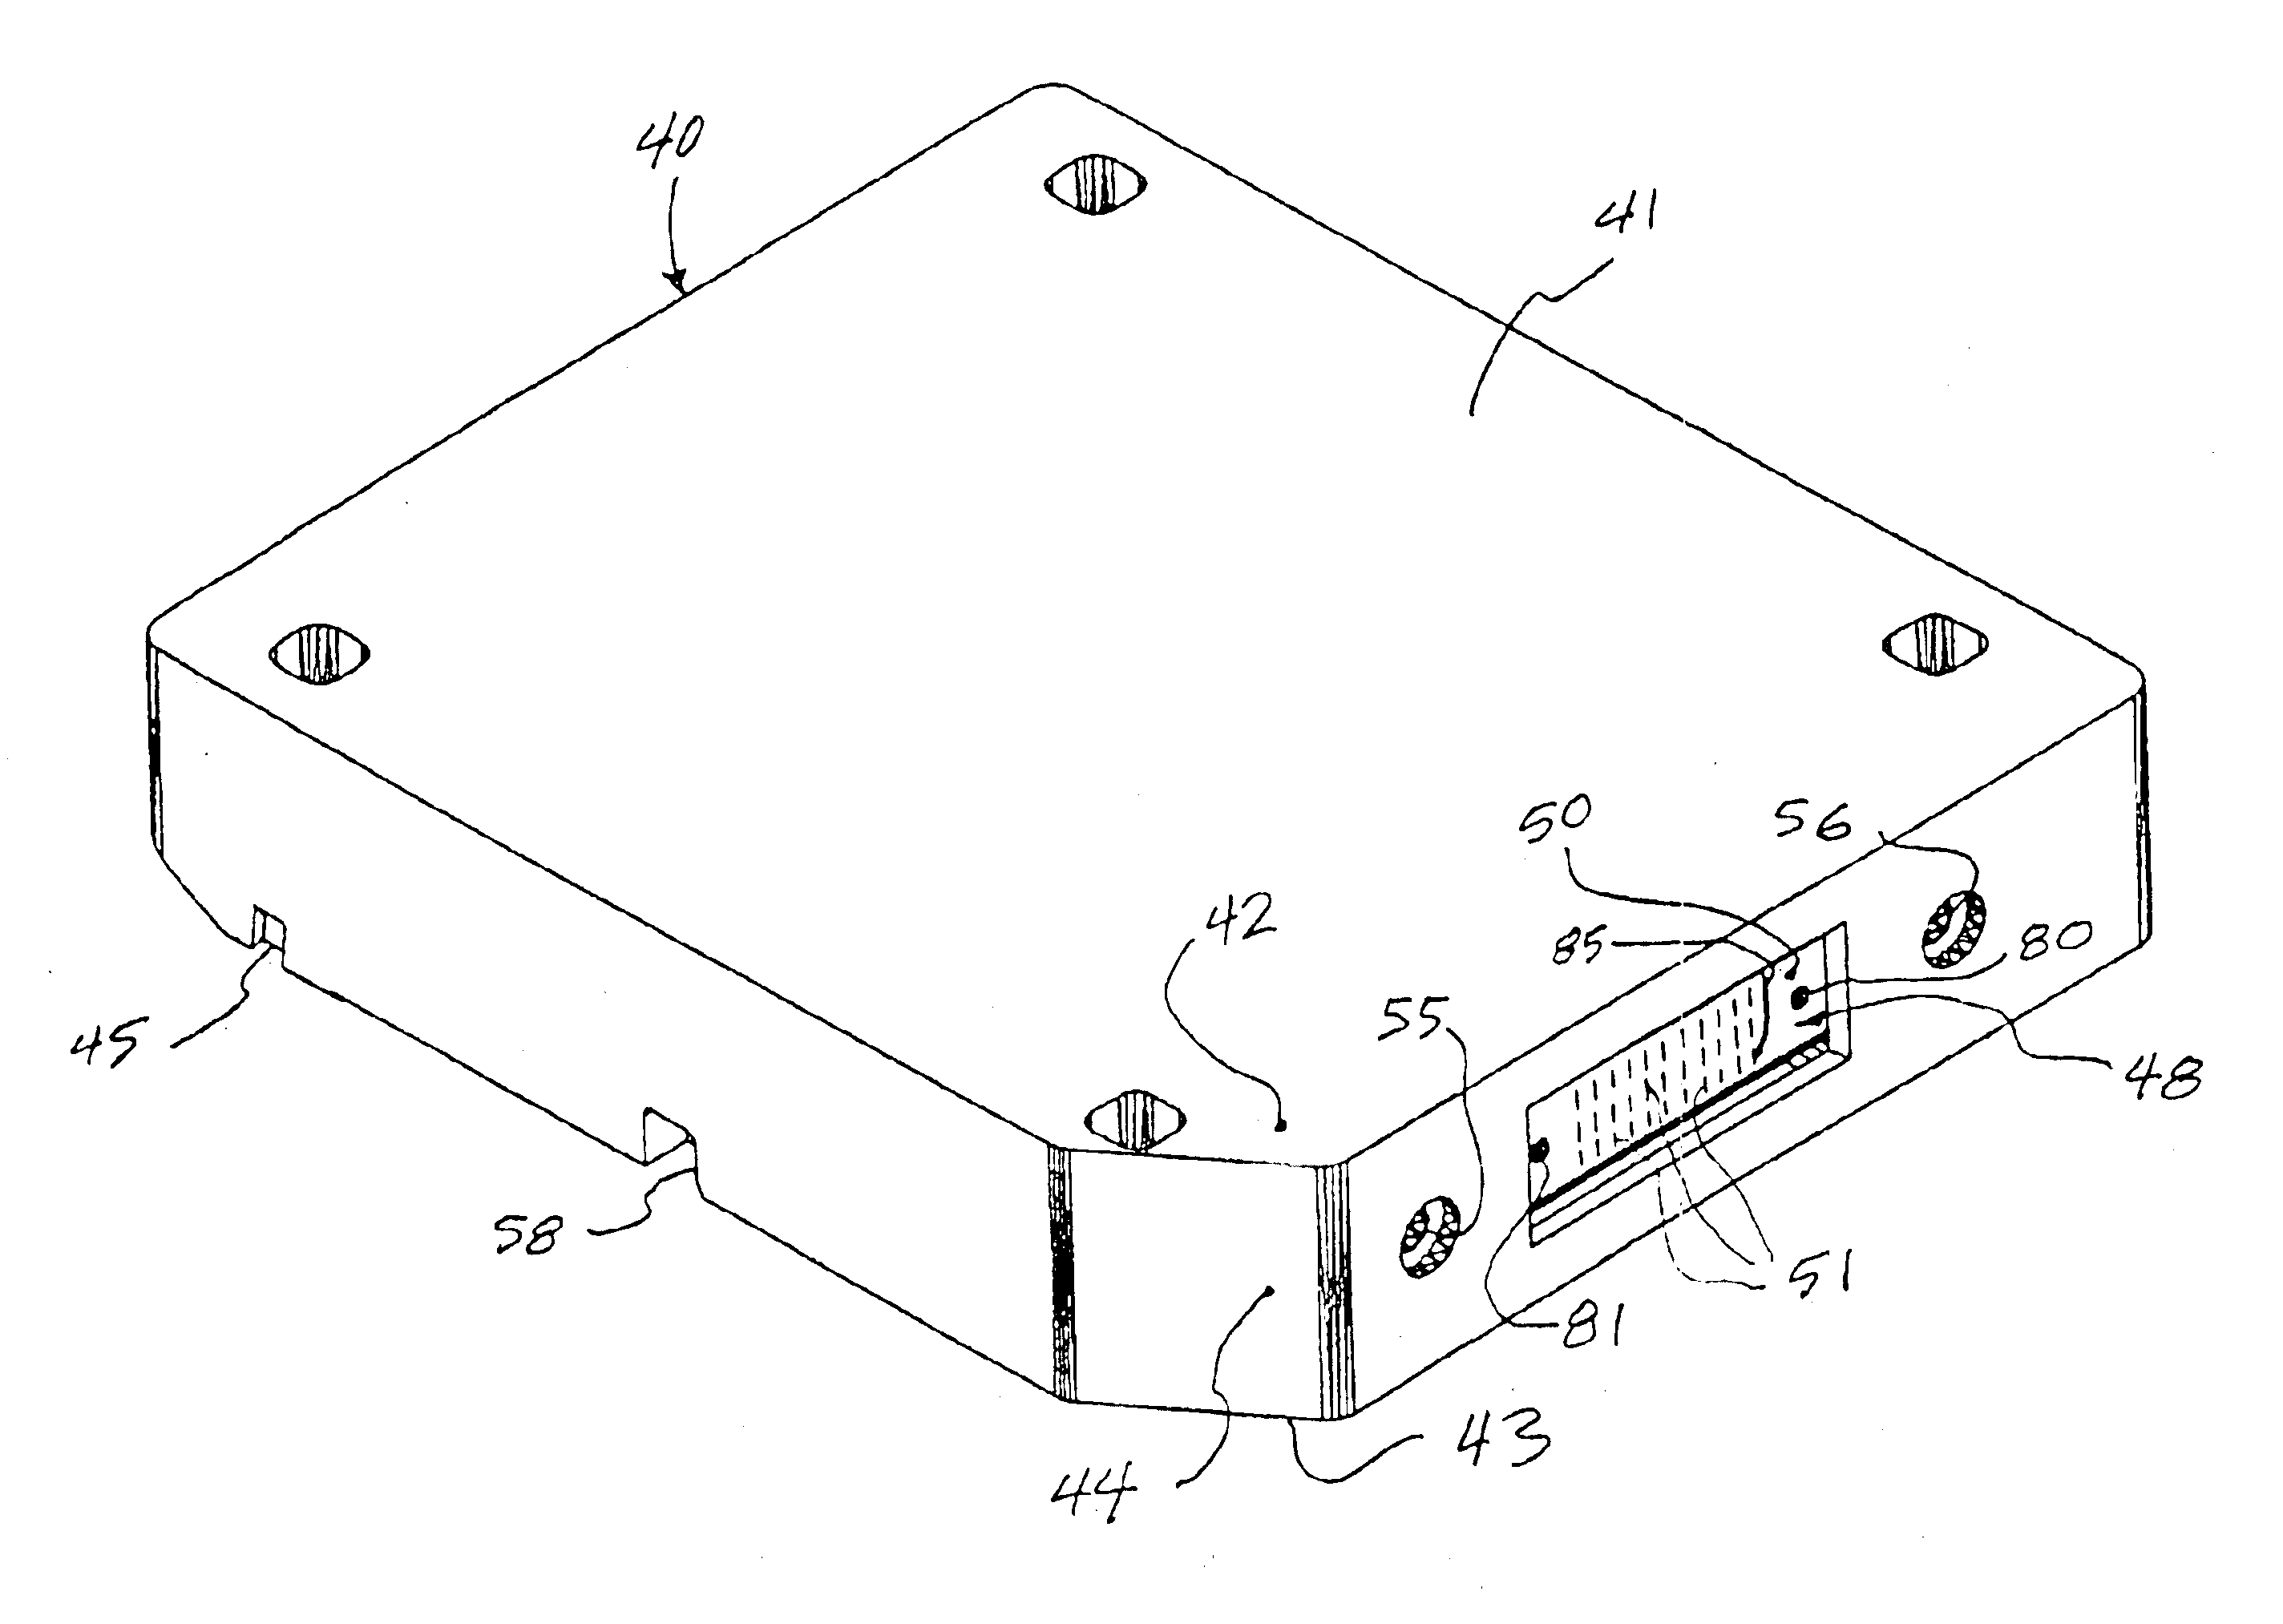 Releasable, repeatable electrical connection employing compression